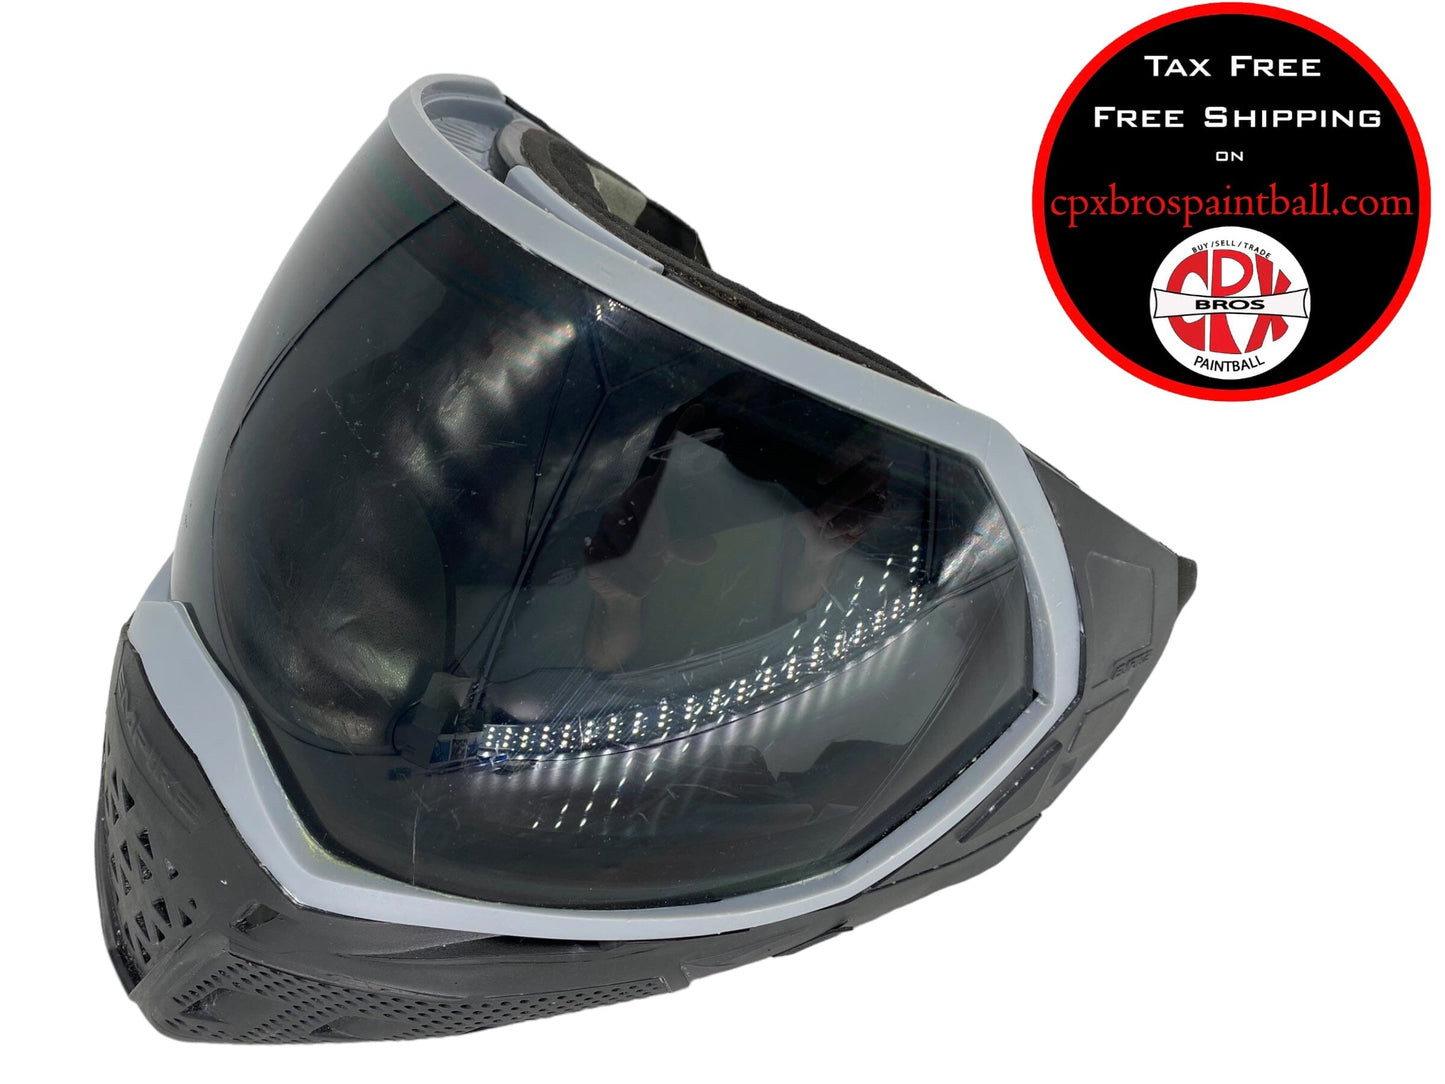 Used Empire Evs Paintball Mask Goggles Paintball Gun from CPXBrosPaintball Buy/Sell/Trade Paintball Markers, New Paintball Guns, Paintball Hoppers, Paintball Masks, and Hormesis Headbands